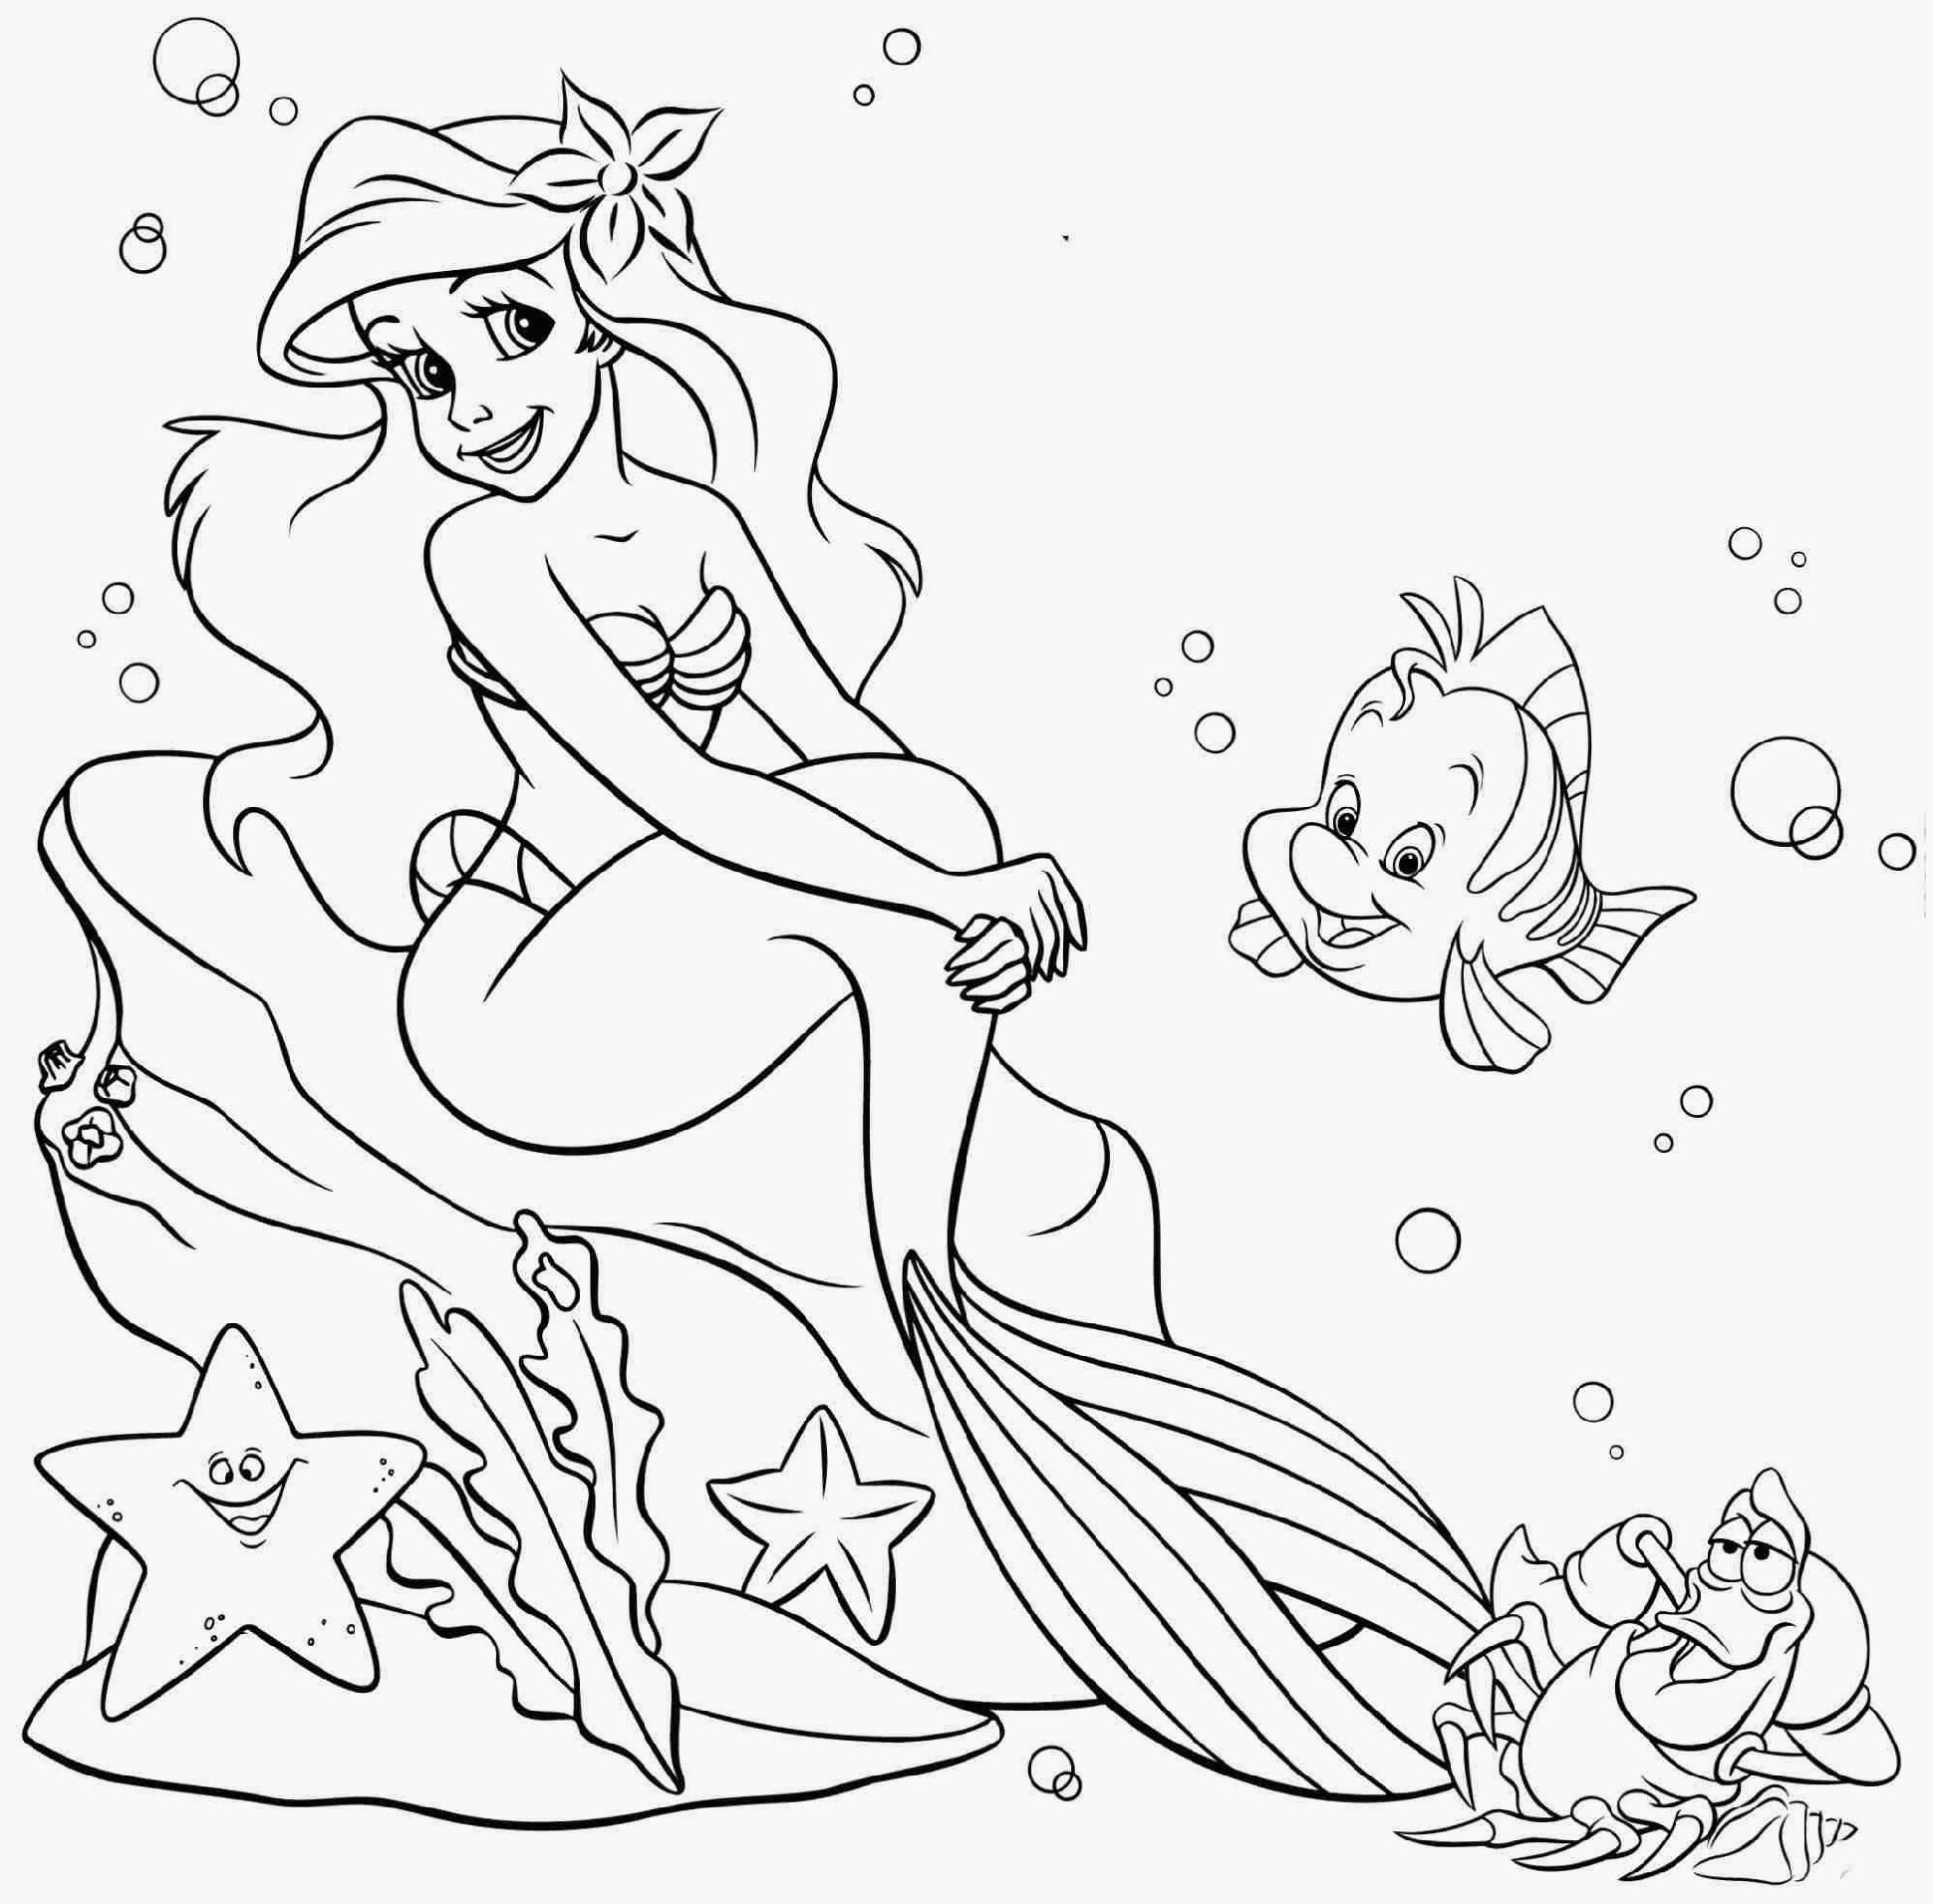 Coloring Pages Of Little Mermaid Coloring Pages Coloring Page Little Mermaid Printable Pages Free